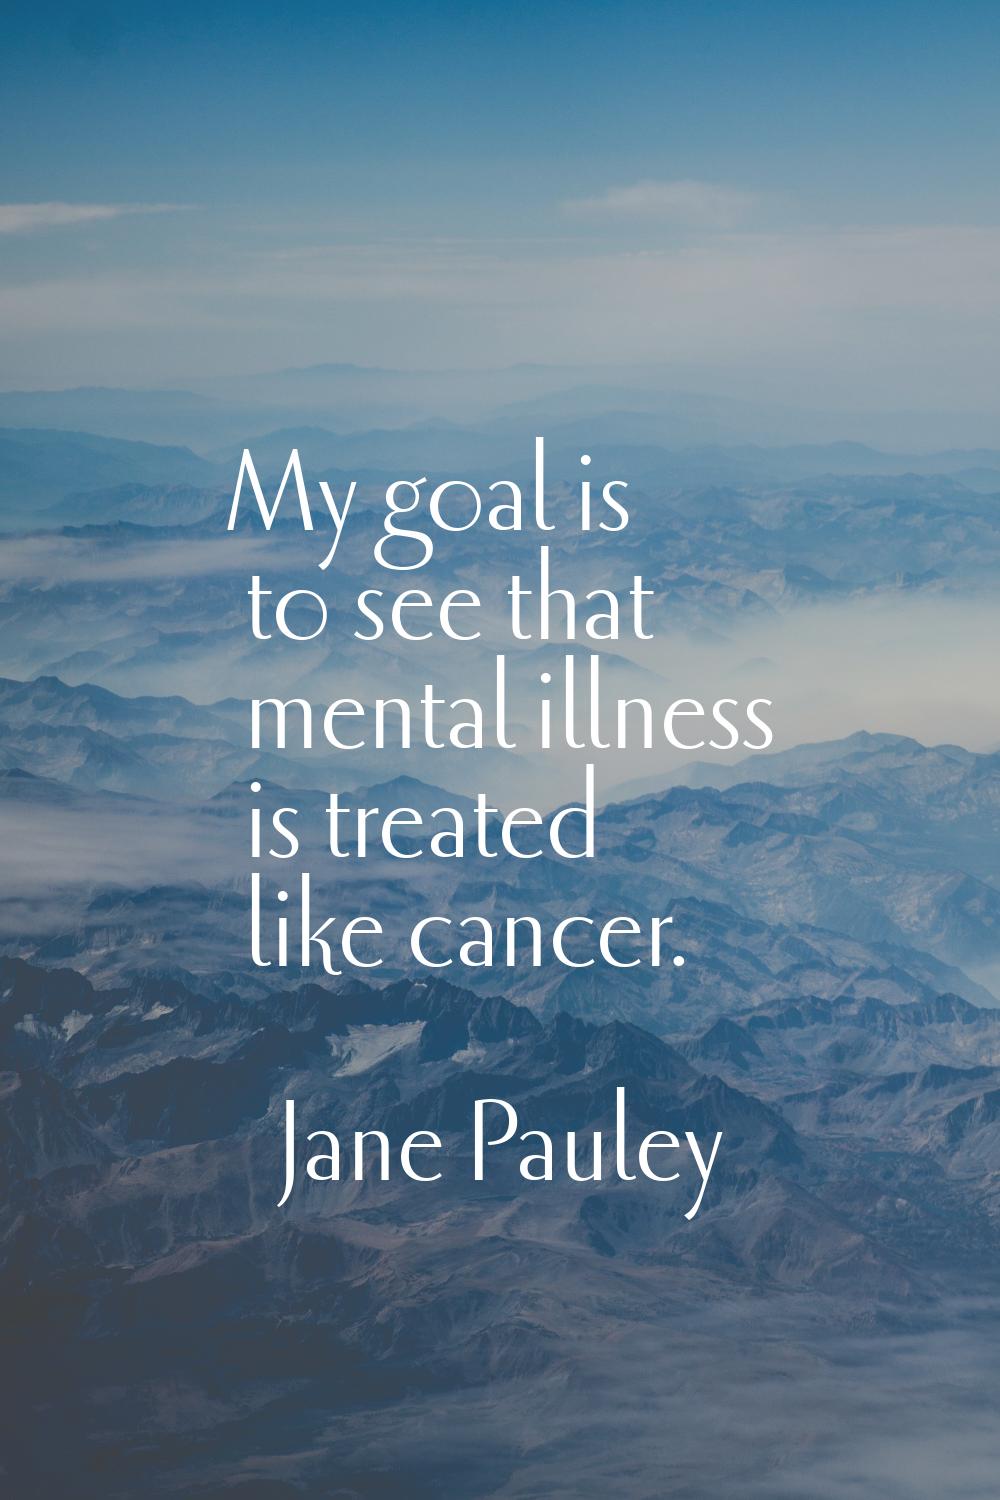 My goal is to see that mental illness is treated like cancer.